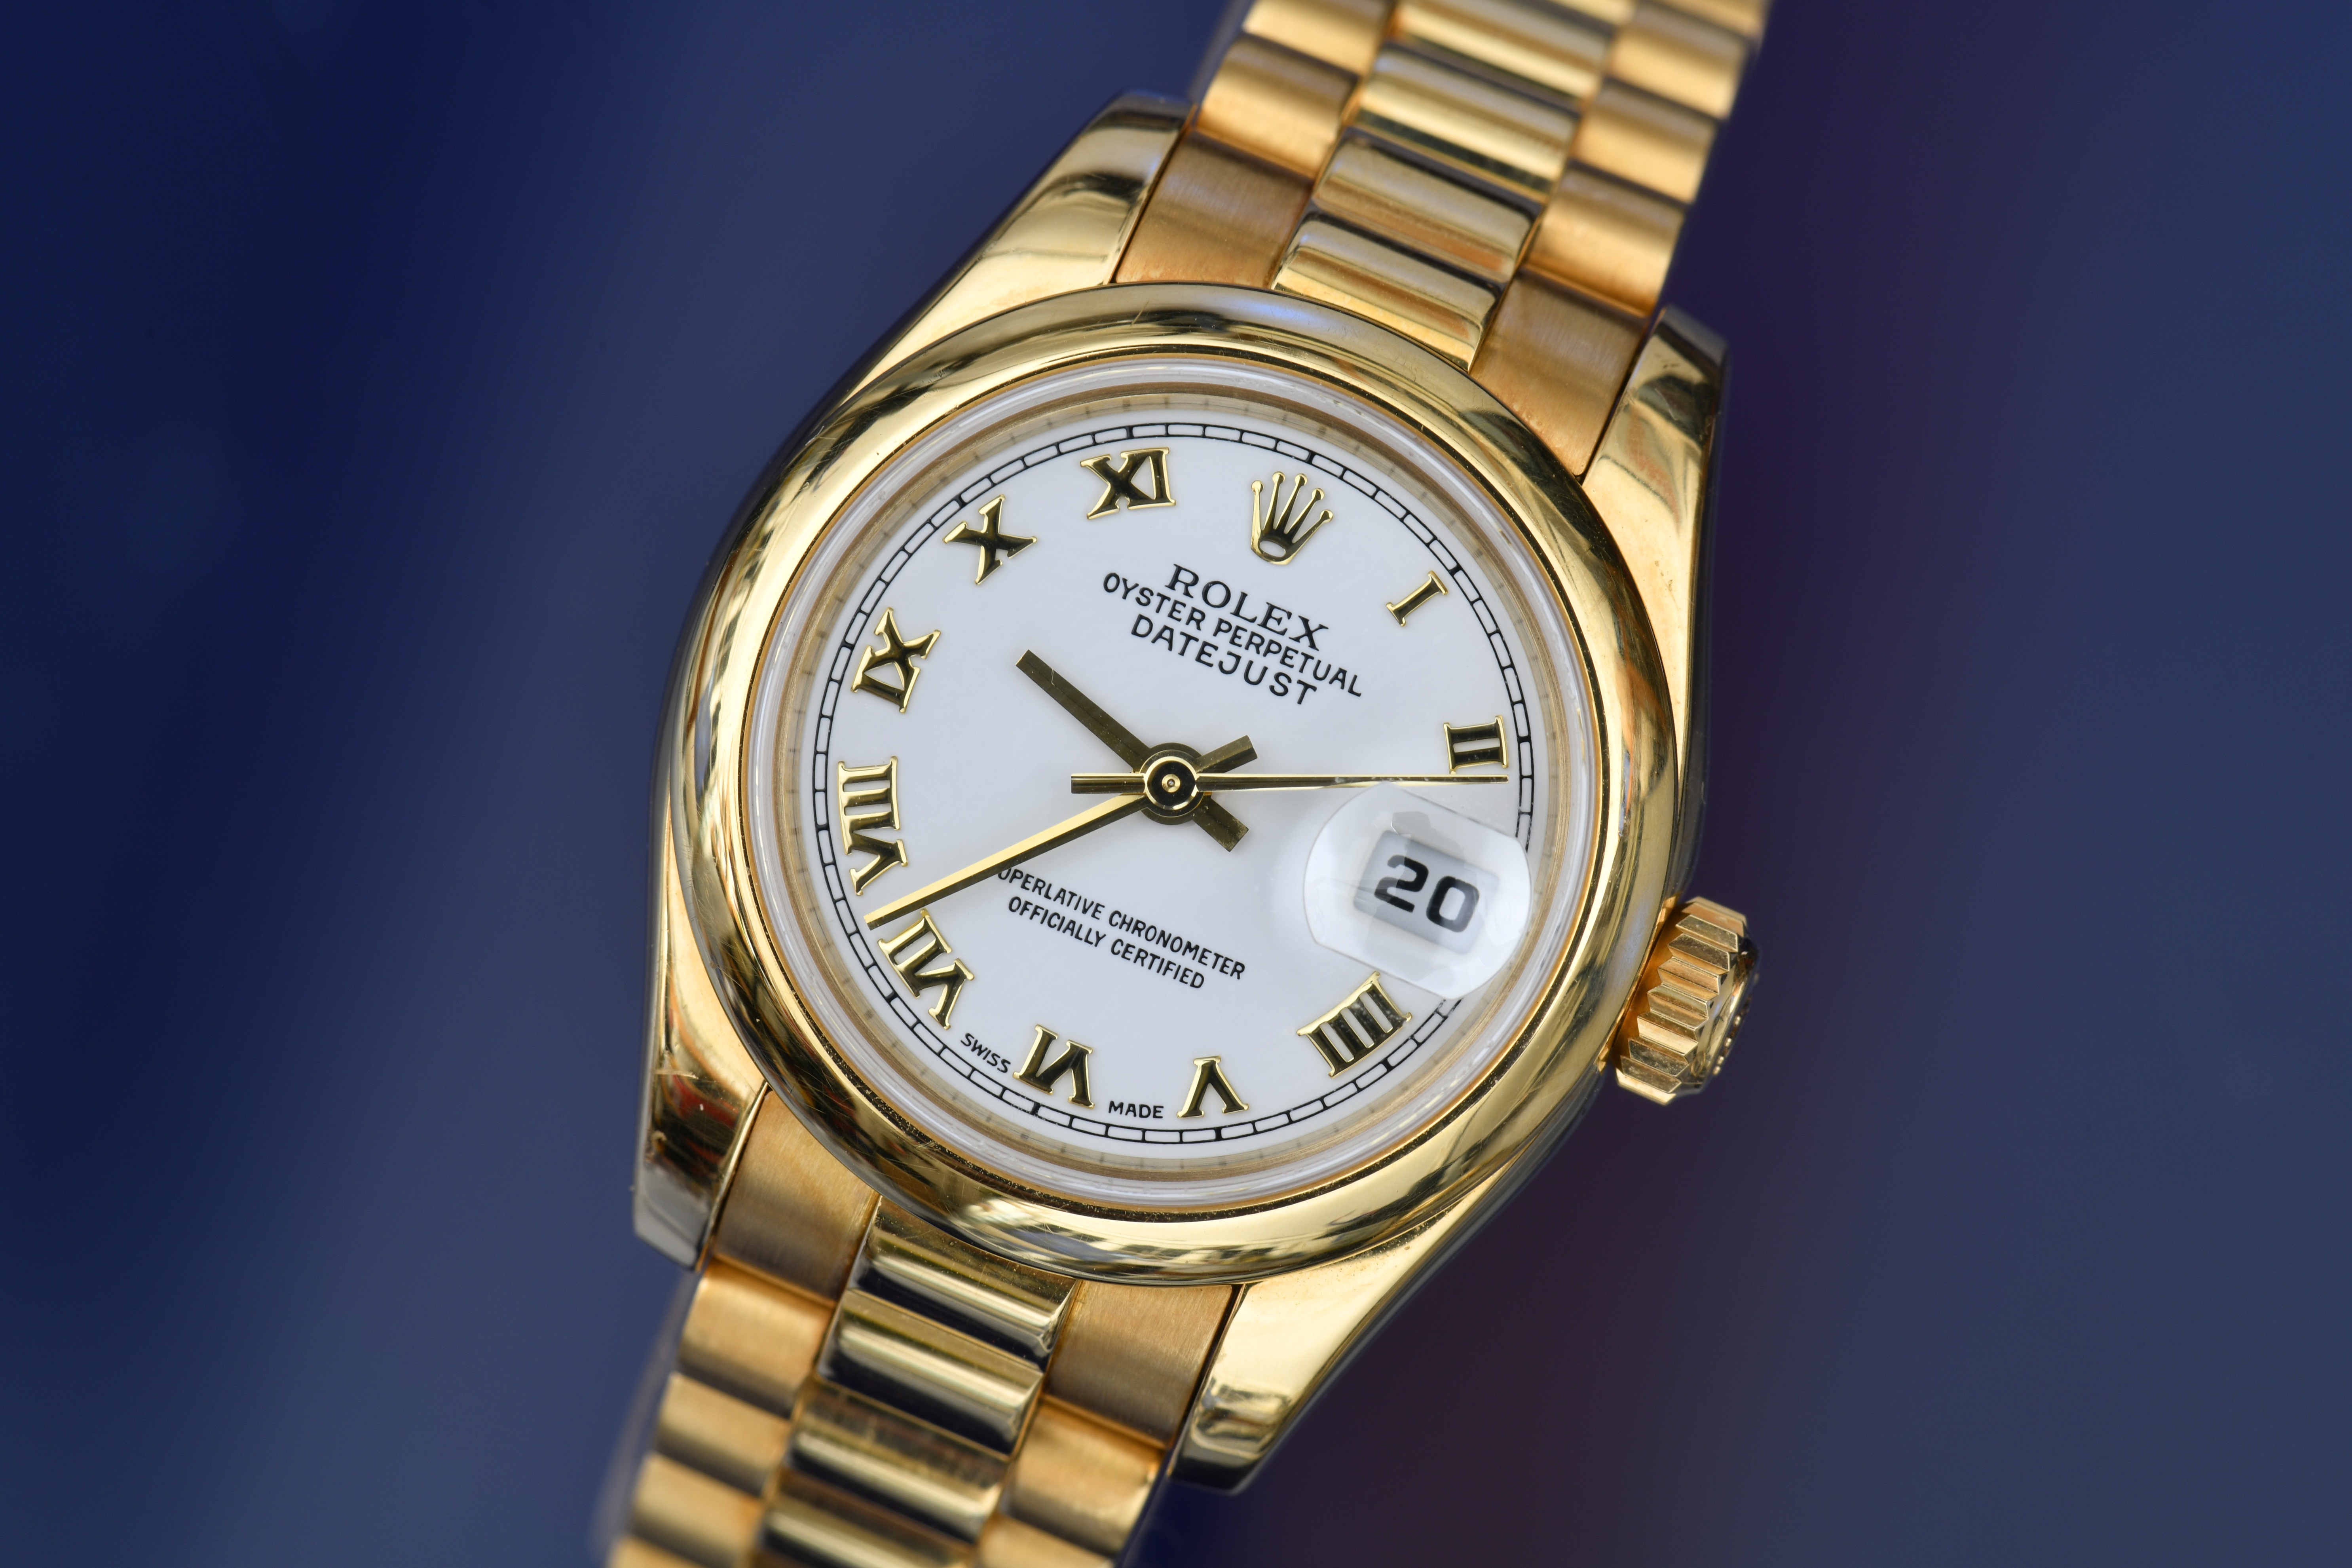 Rolex Oyster Perpetual Datejust 18ct gold ladies automatic wristwatch ref. 179168 with date - Image 3 of 4